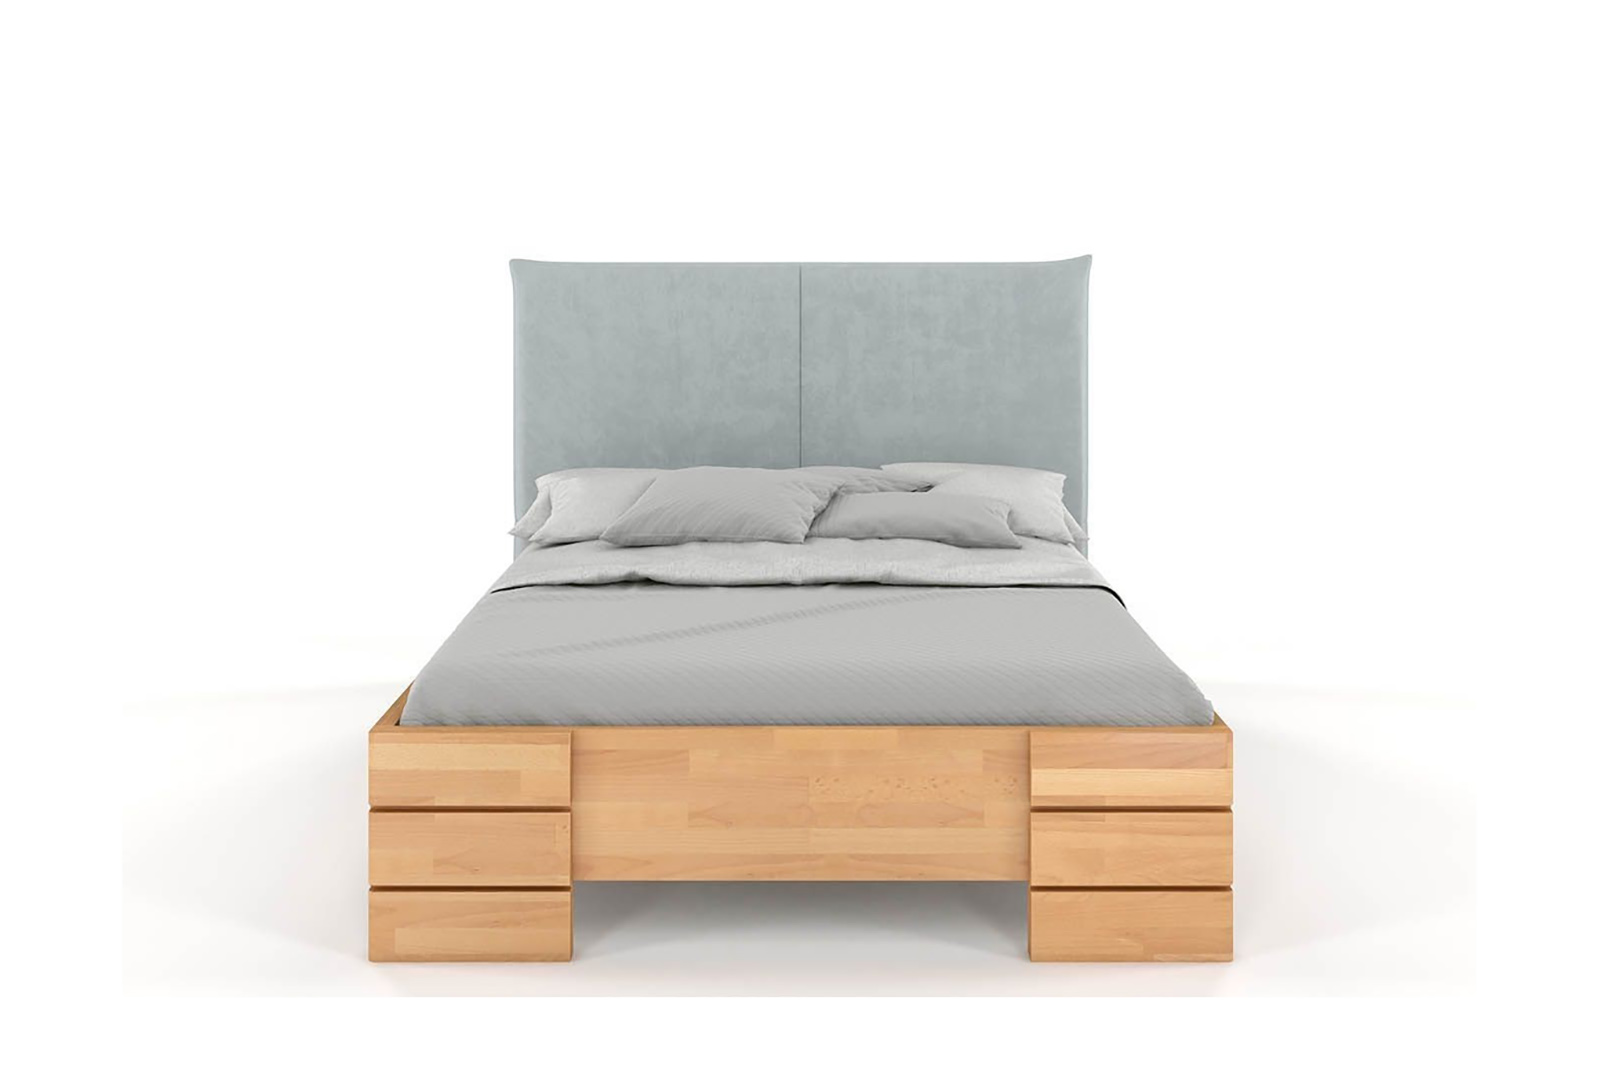 VISBY SANTAP WOODEN BEECH BED WITH AN UPHOLSTERED HEADBOARD 2